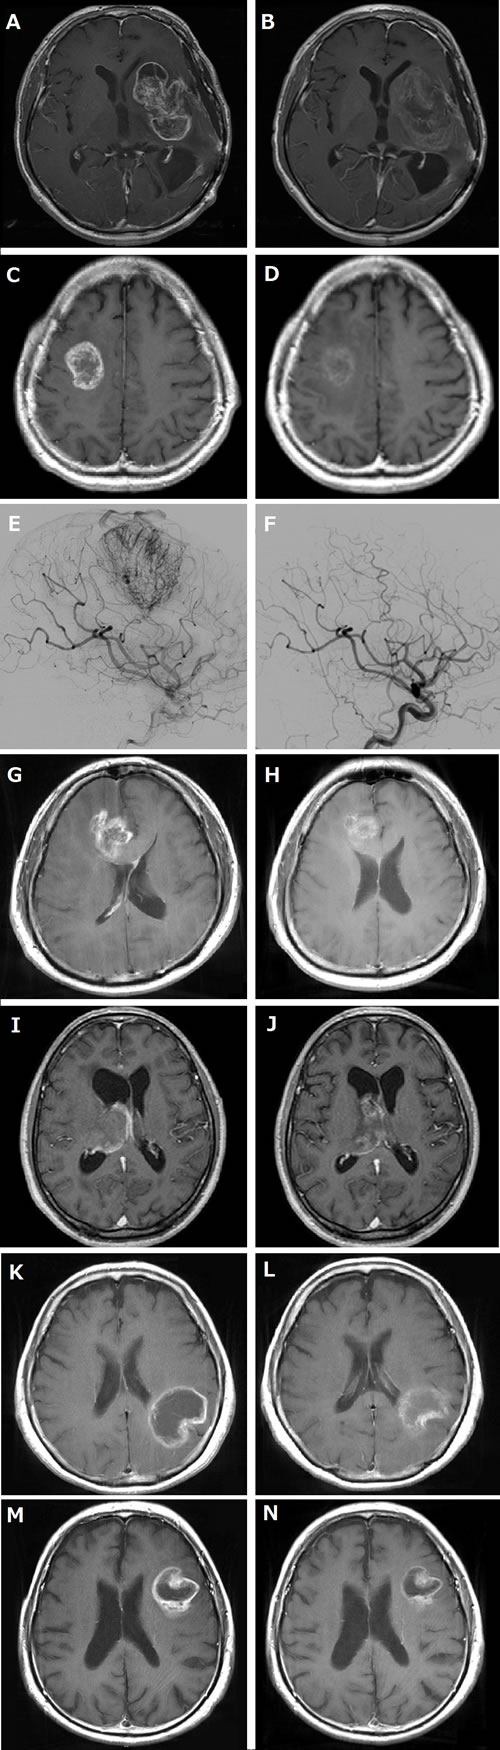 MRI and angiography of before and after neoadjuvant bevacizumab (Bev).